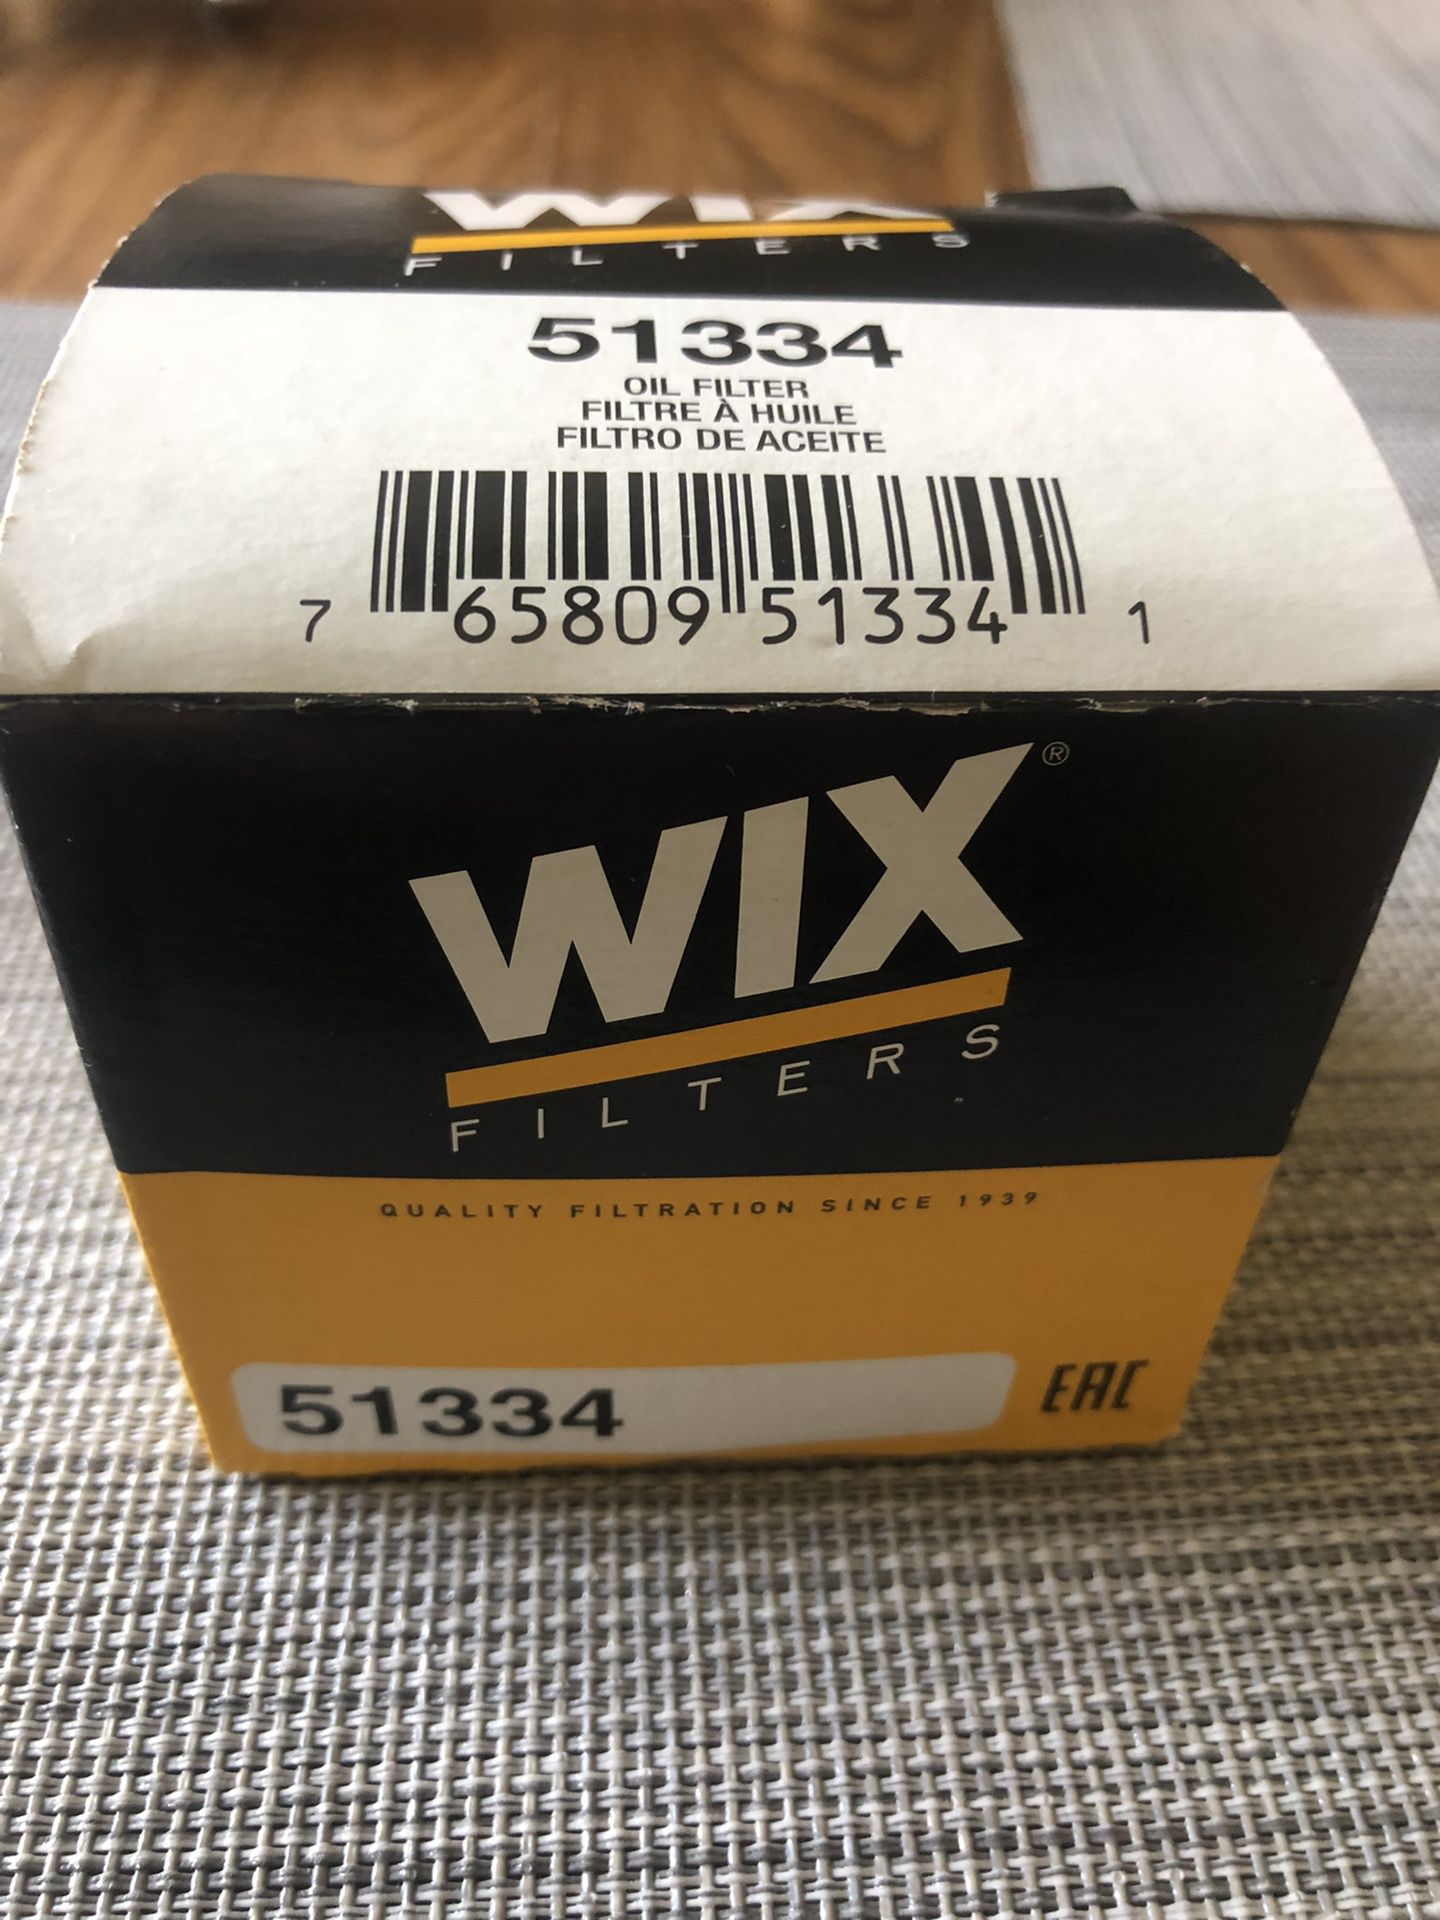 WIX OIL FILTER 51334  (brand new in box)